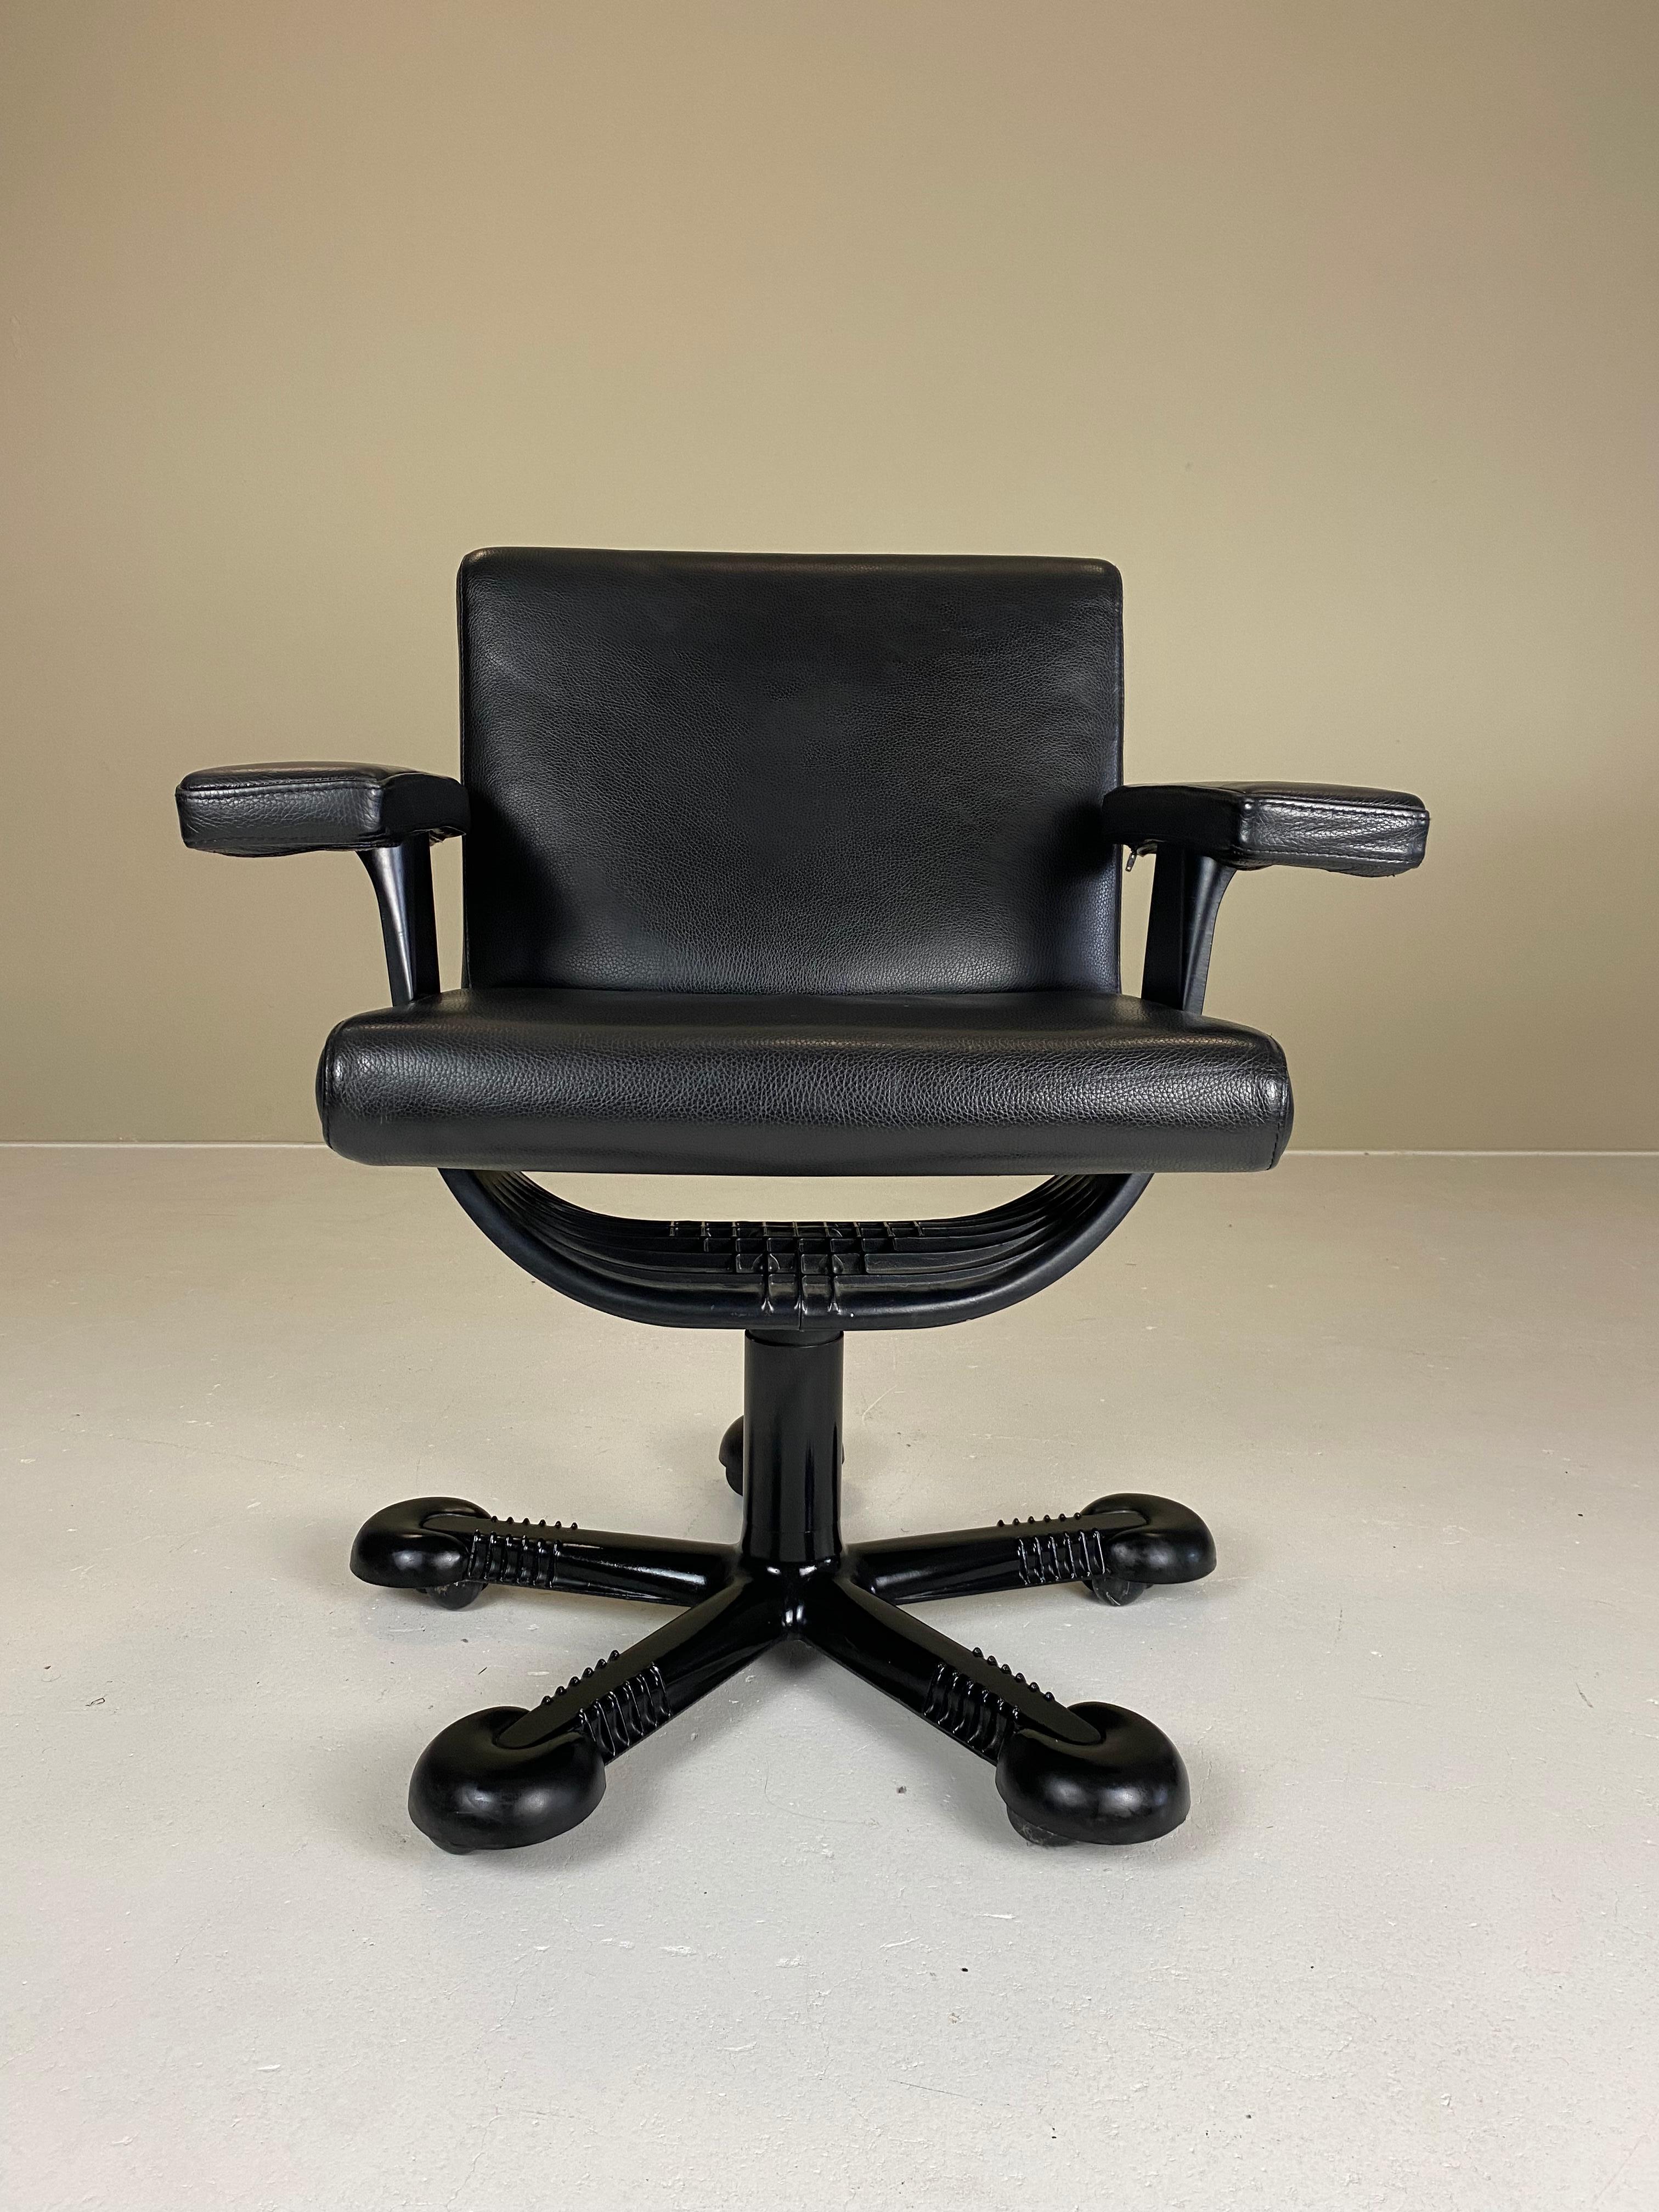 Designed by Afra and Tobia Scarpa for Molteni in 1975, the quirky mix chair was originally designed for executive offices and conference rooms. This extremely comfortable, sculptural leather desk chair features an intelligent system for connecting